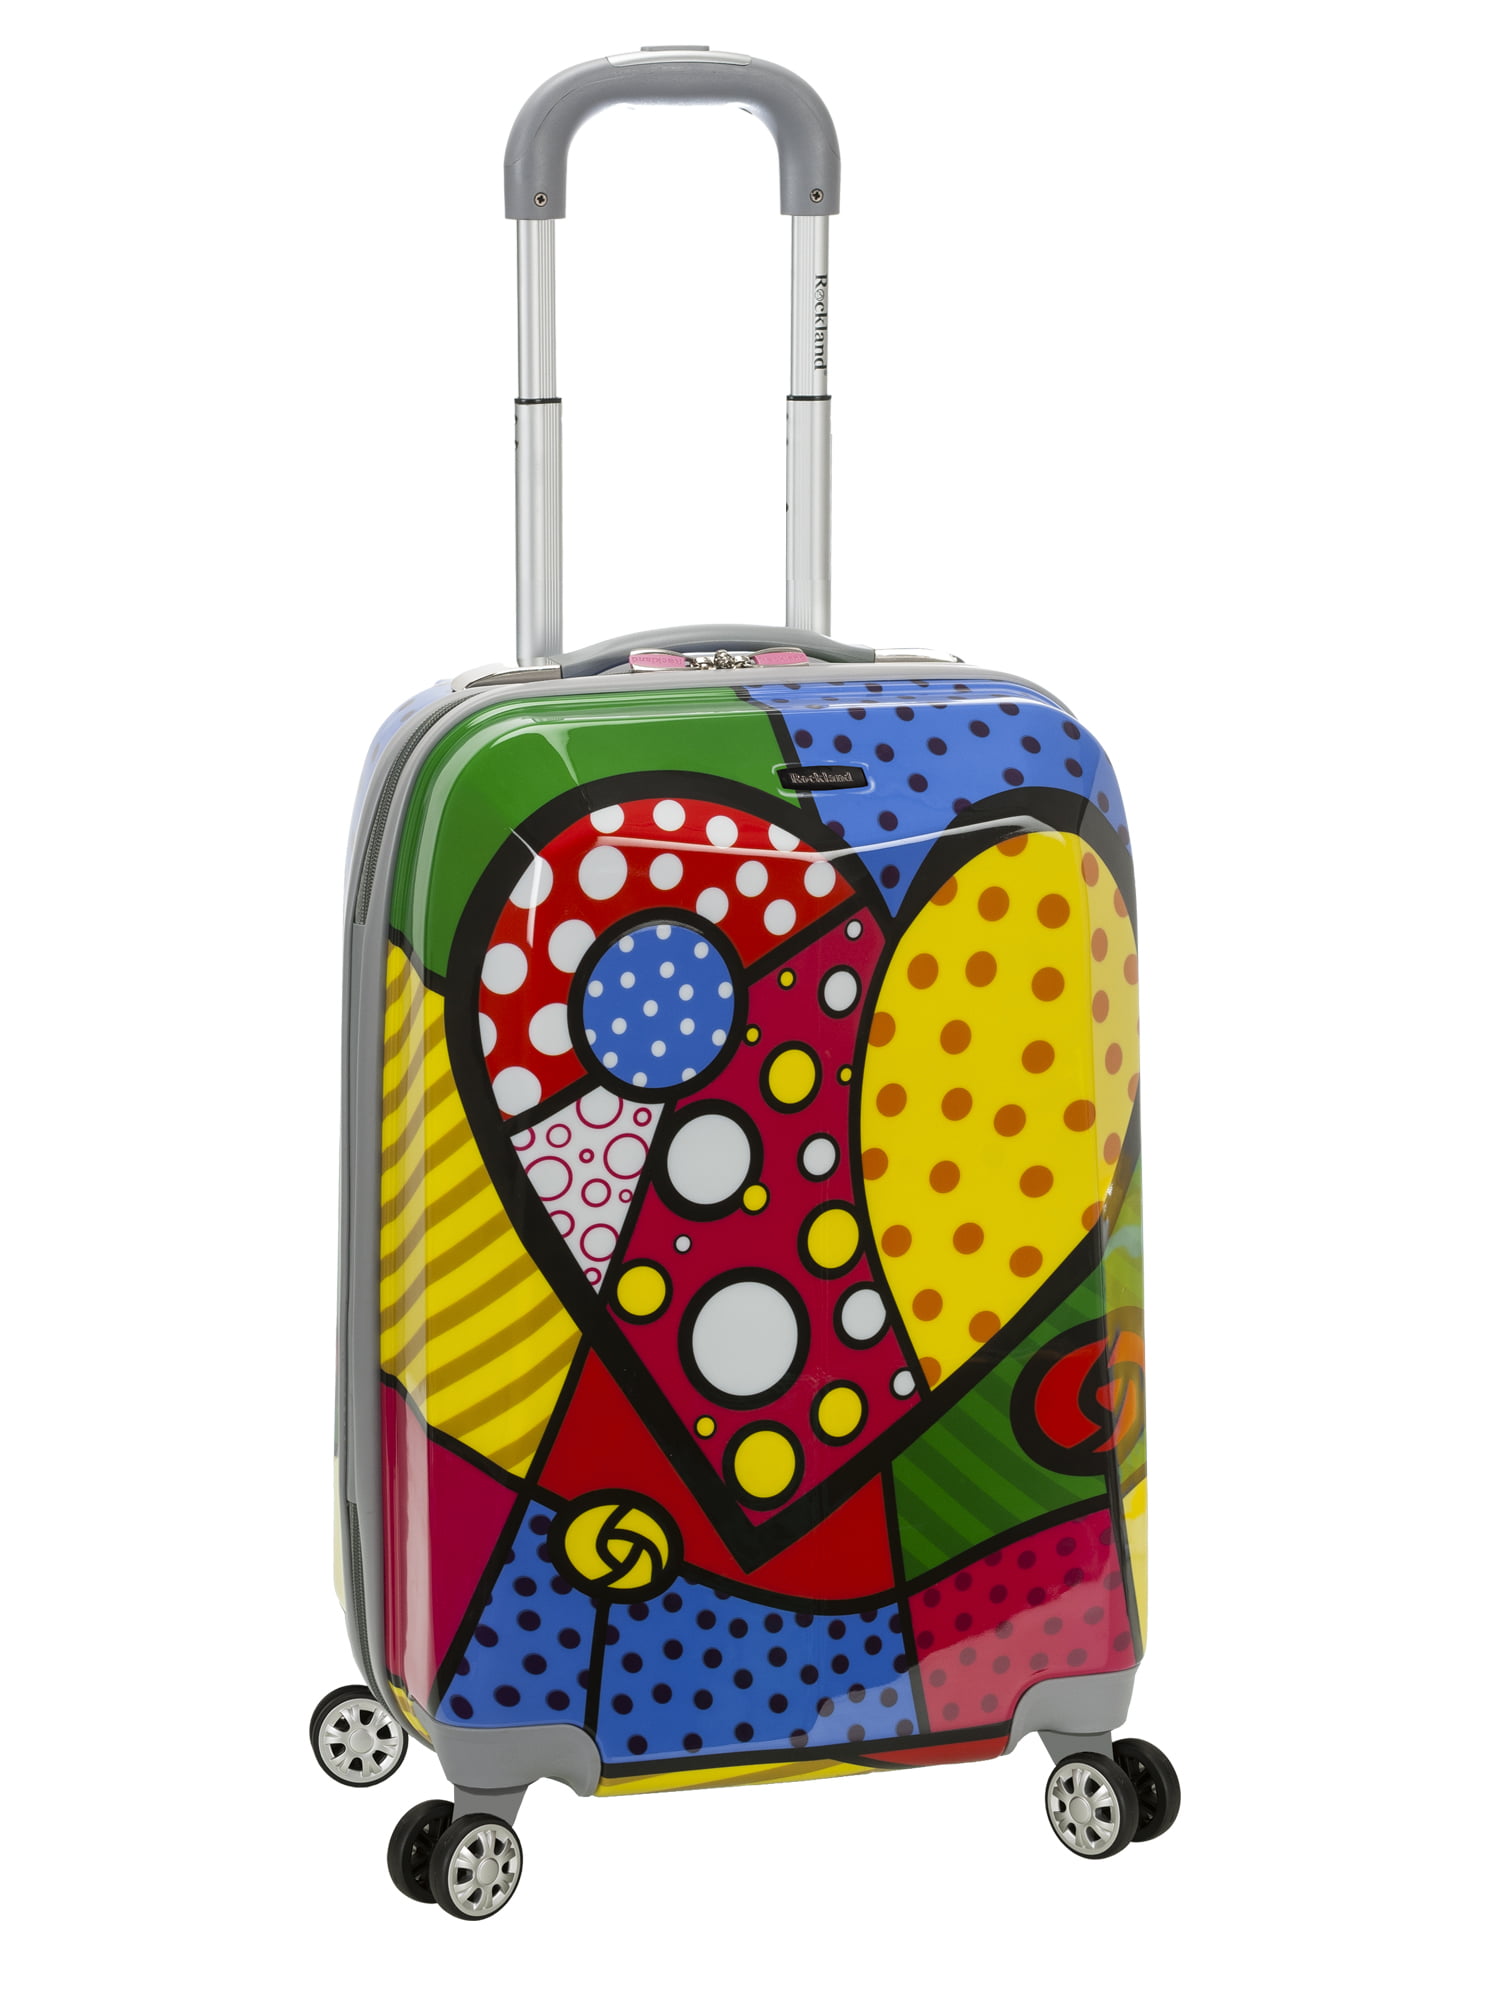 Rockland Vision Polycarbonate Hardside Carry On Spinner Suitcase - Heart